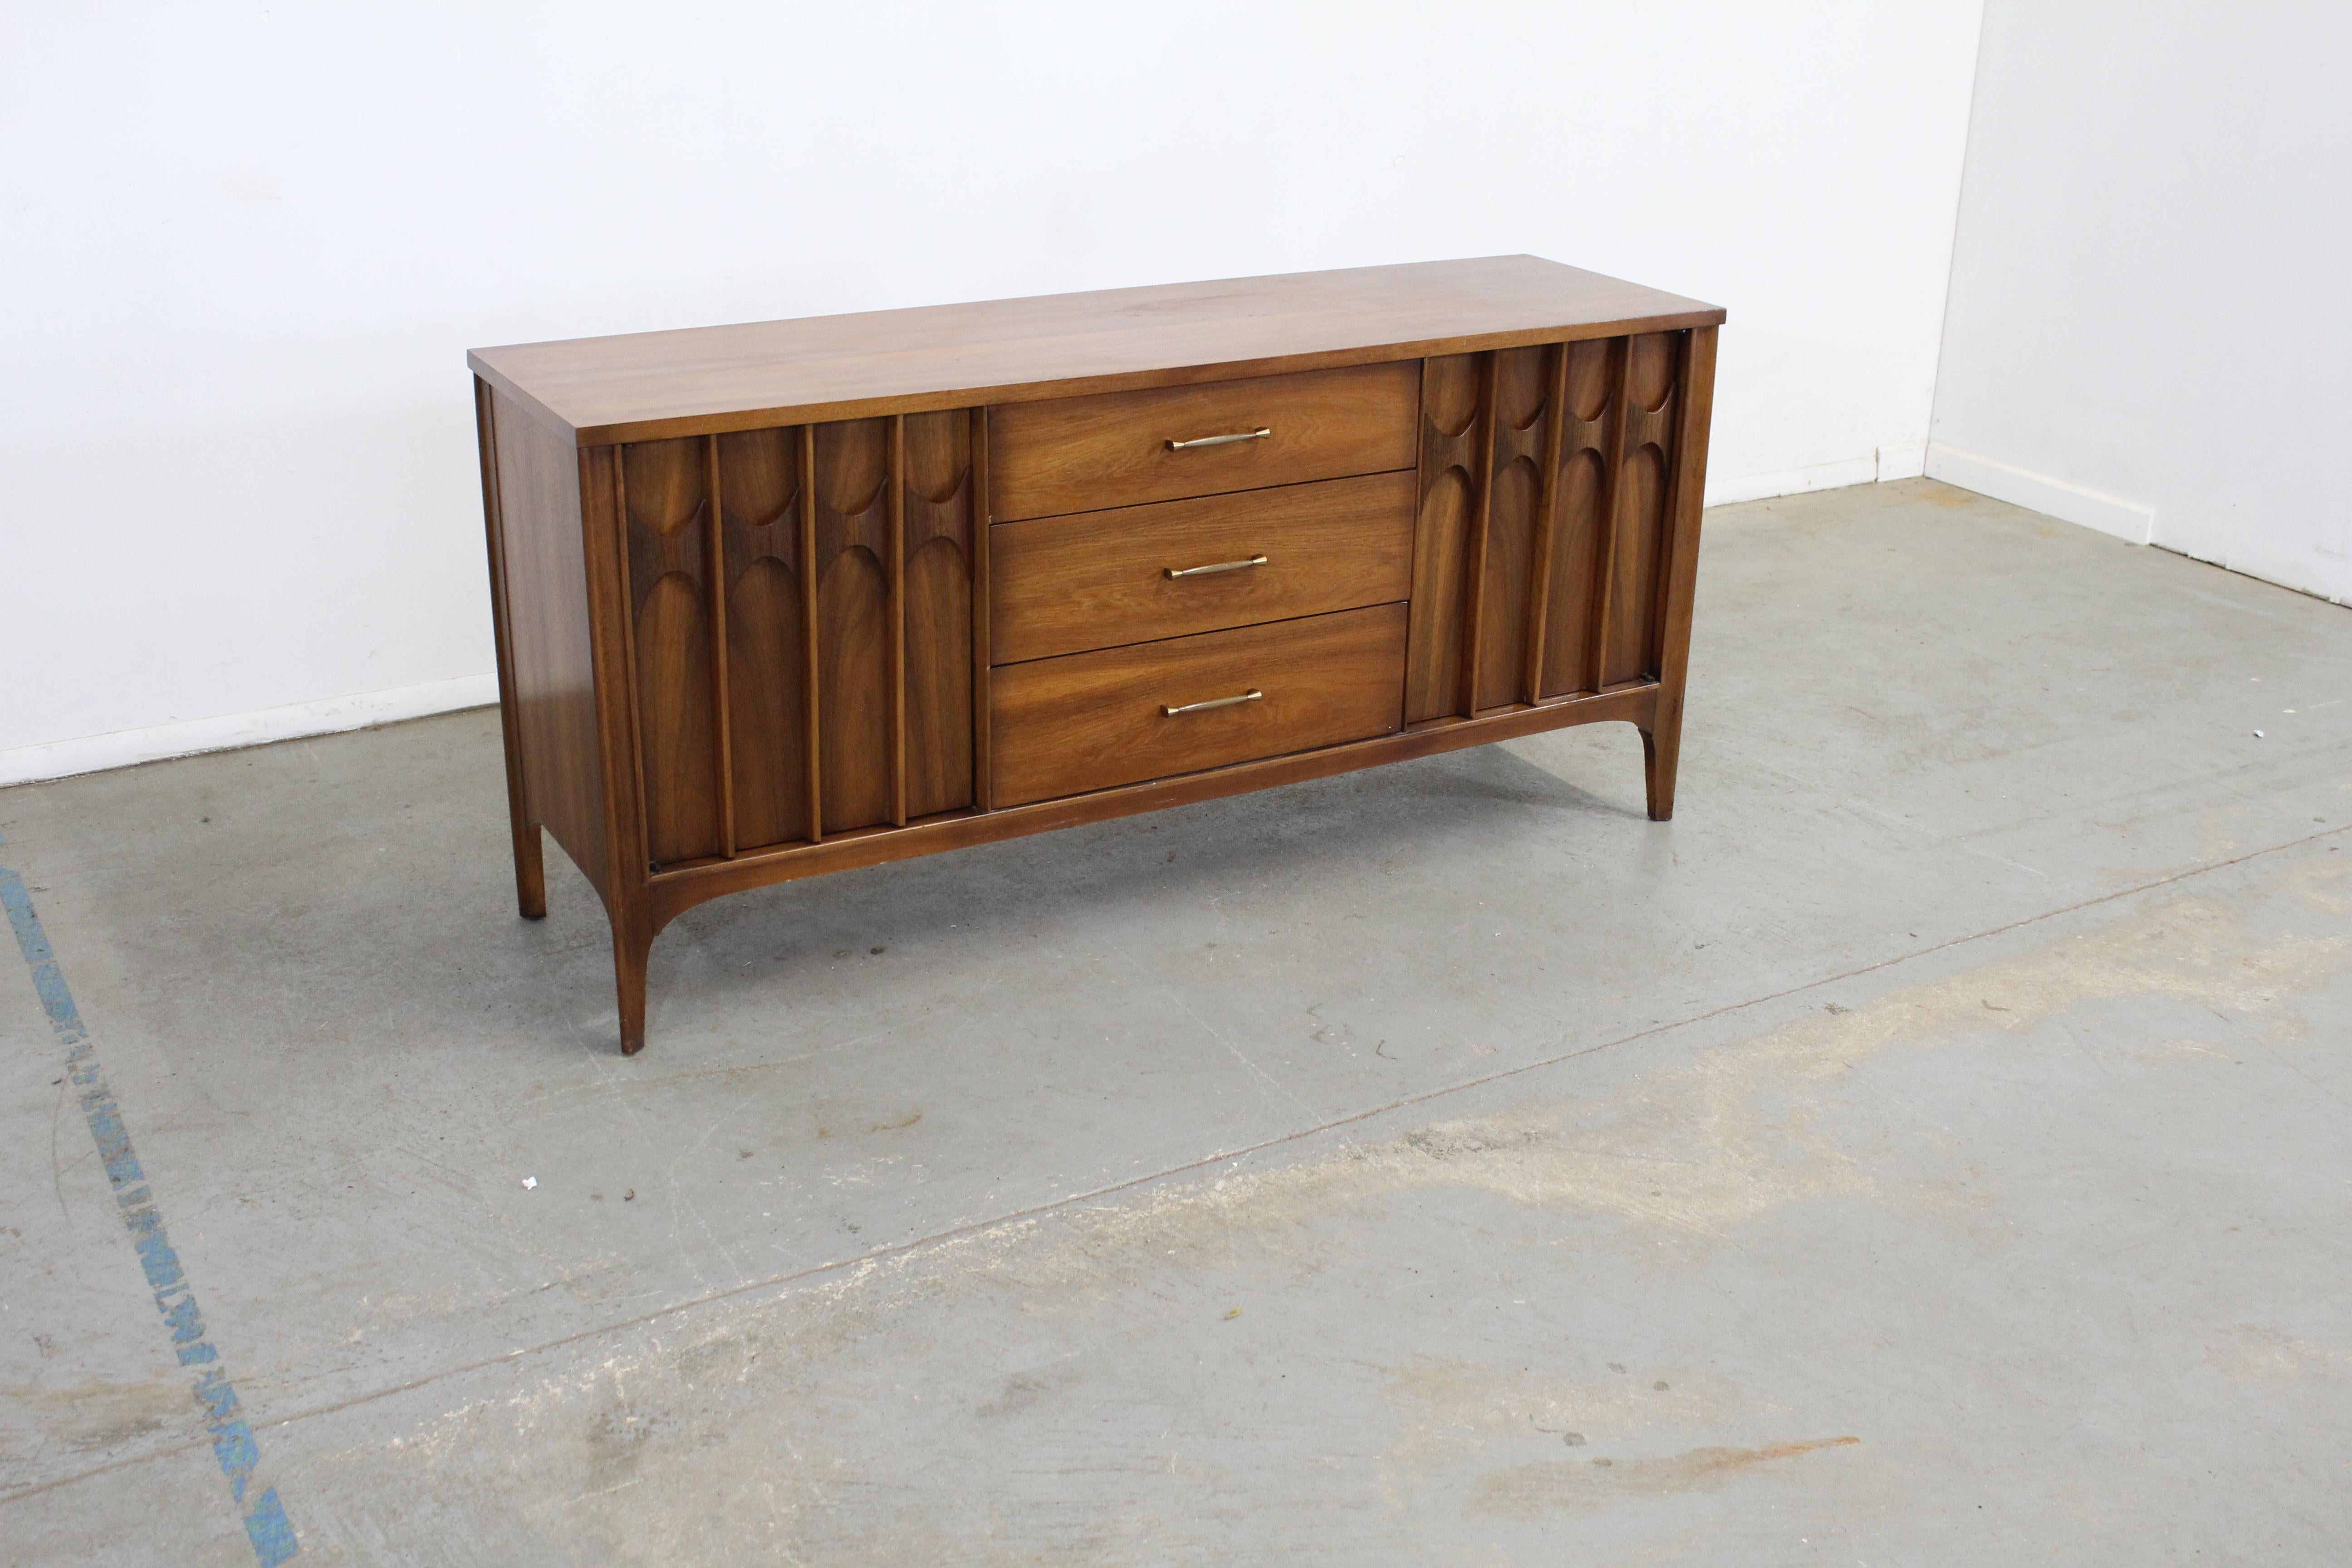 Mid-Century Danish Modern Kent Coffey Perspecta walnut/rosewood credenza #124

Offered is a piece of time and design: a Mid-Century Danish Modern Kent Coffey Perspecta Walnut/Rosewood Credenza. The piece has a nice shape and modern lines. It is